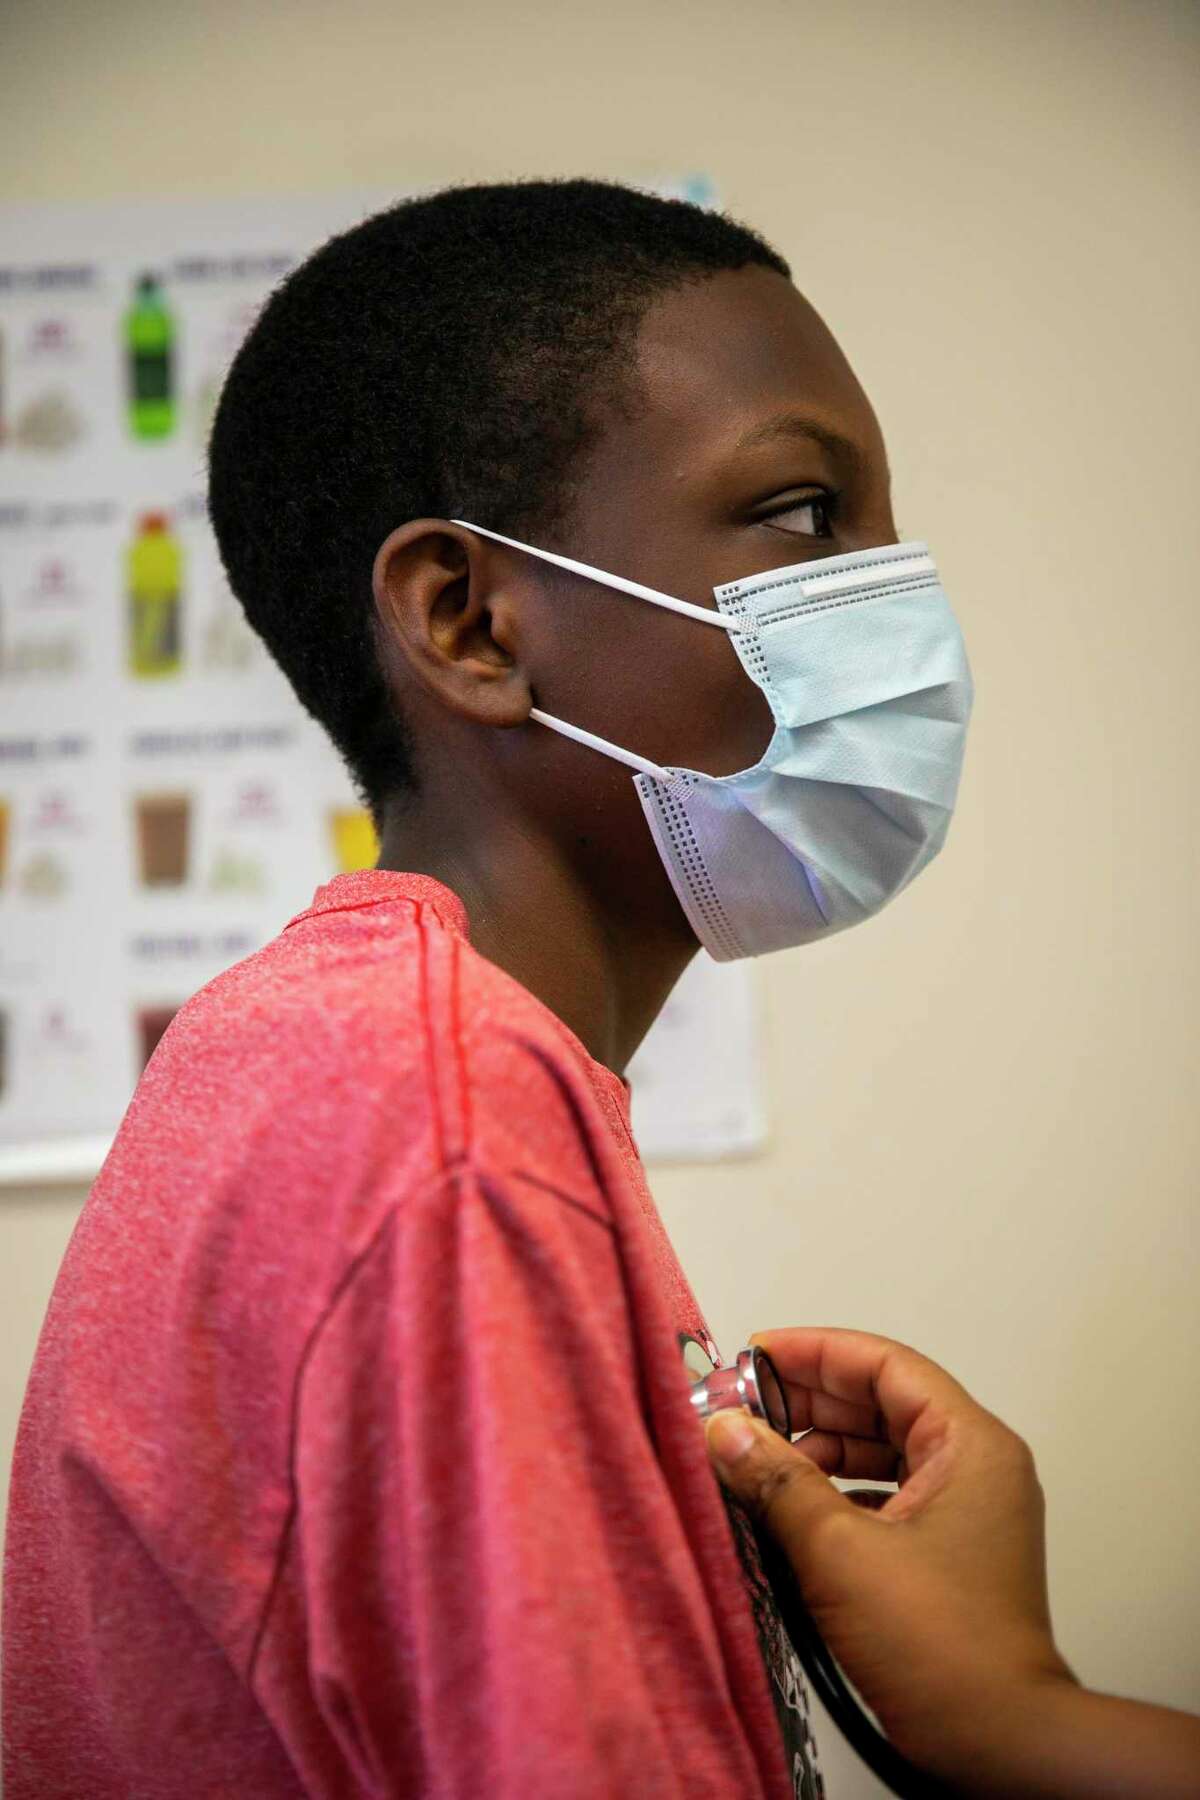 Thirteen-year-old Jhony Santos has his heart checked at the Elrod Health Center, a school-based clinic inside of Elrod Elementary School on Monday, Oct. 19, 2020.